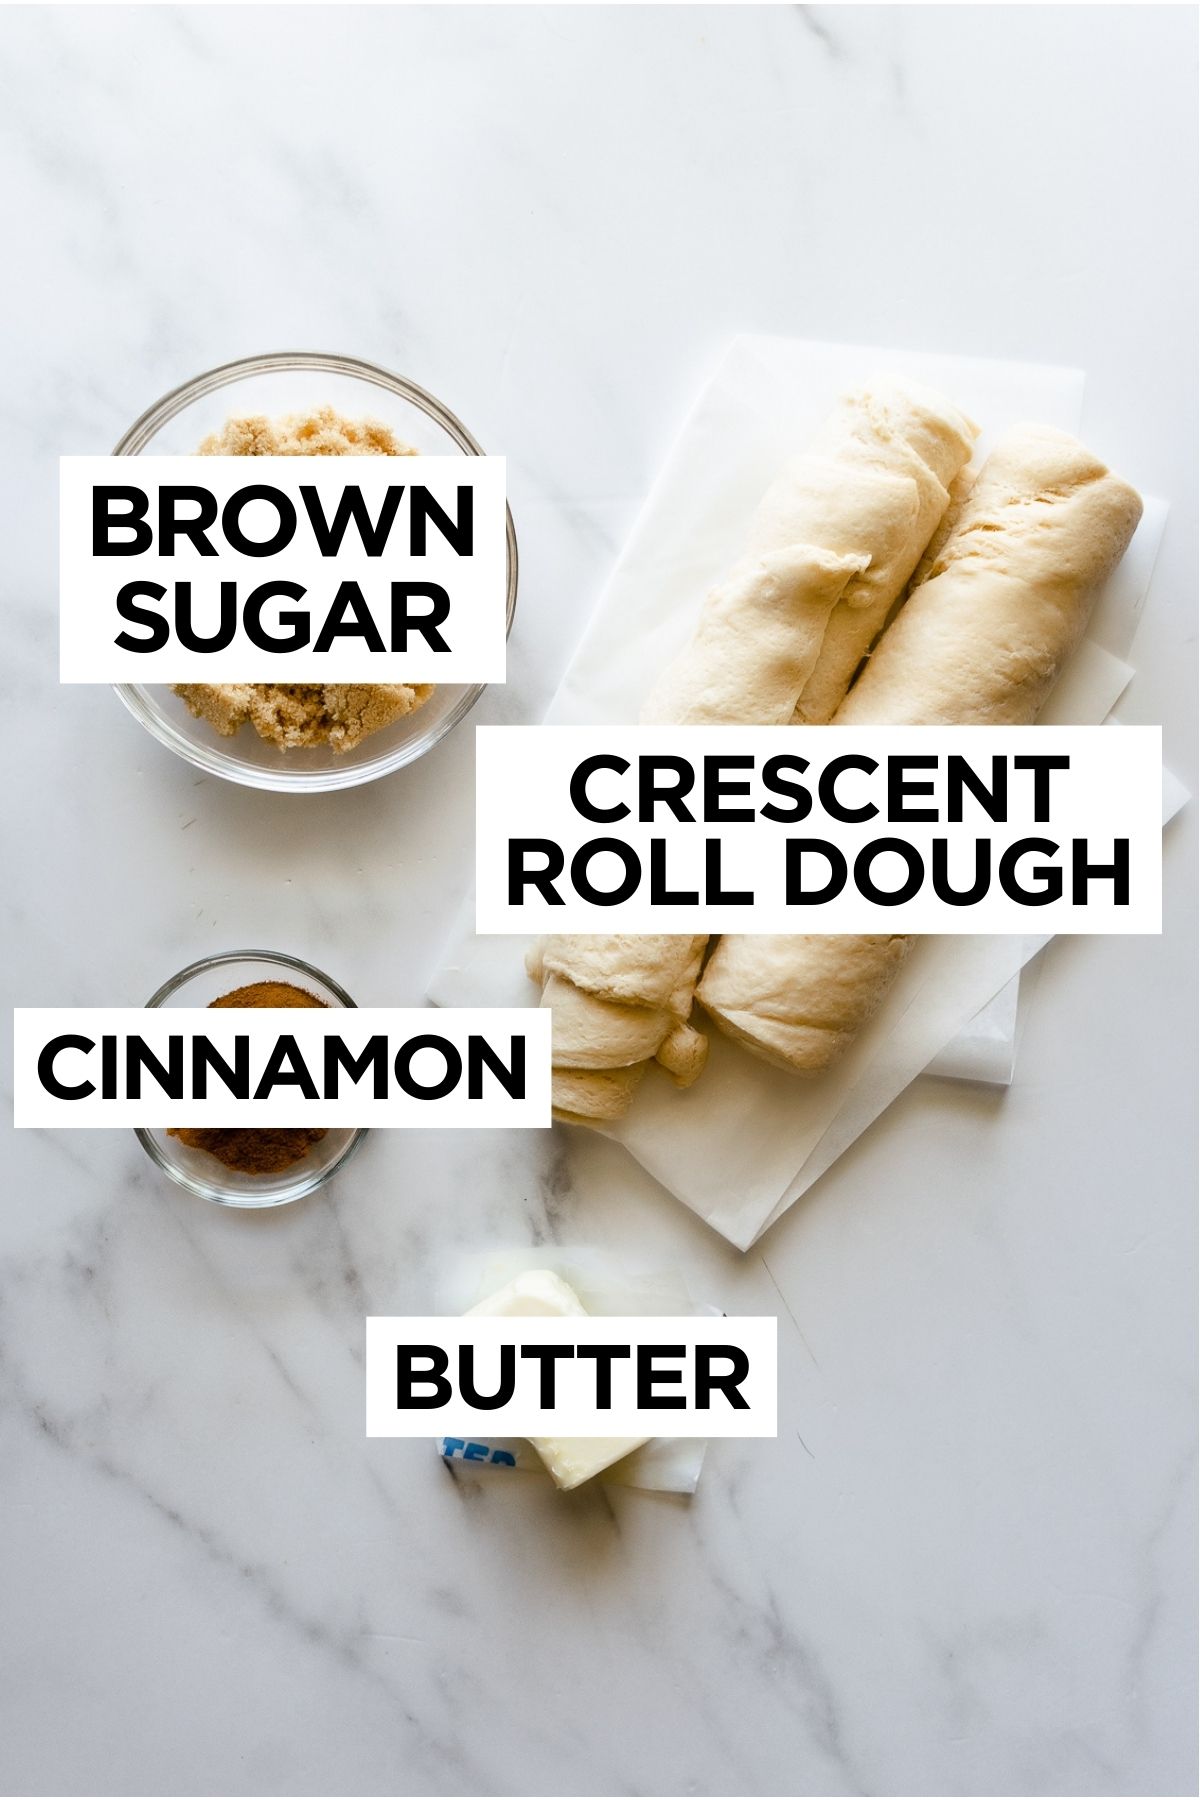 crescent roll cinnamon rolls ingredients such as brown sugar, crescent roll dough, cinnamon and butter.